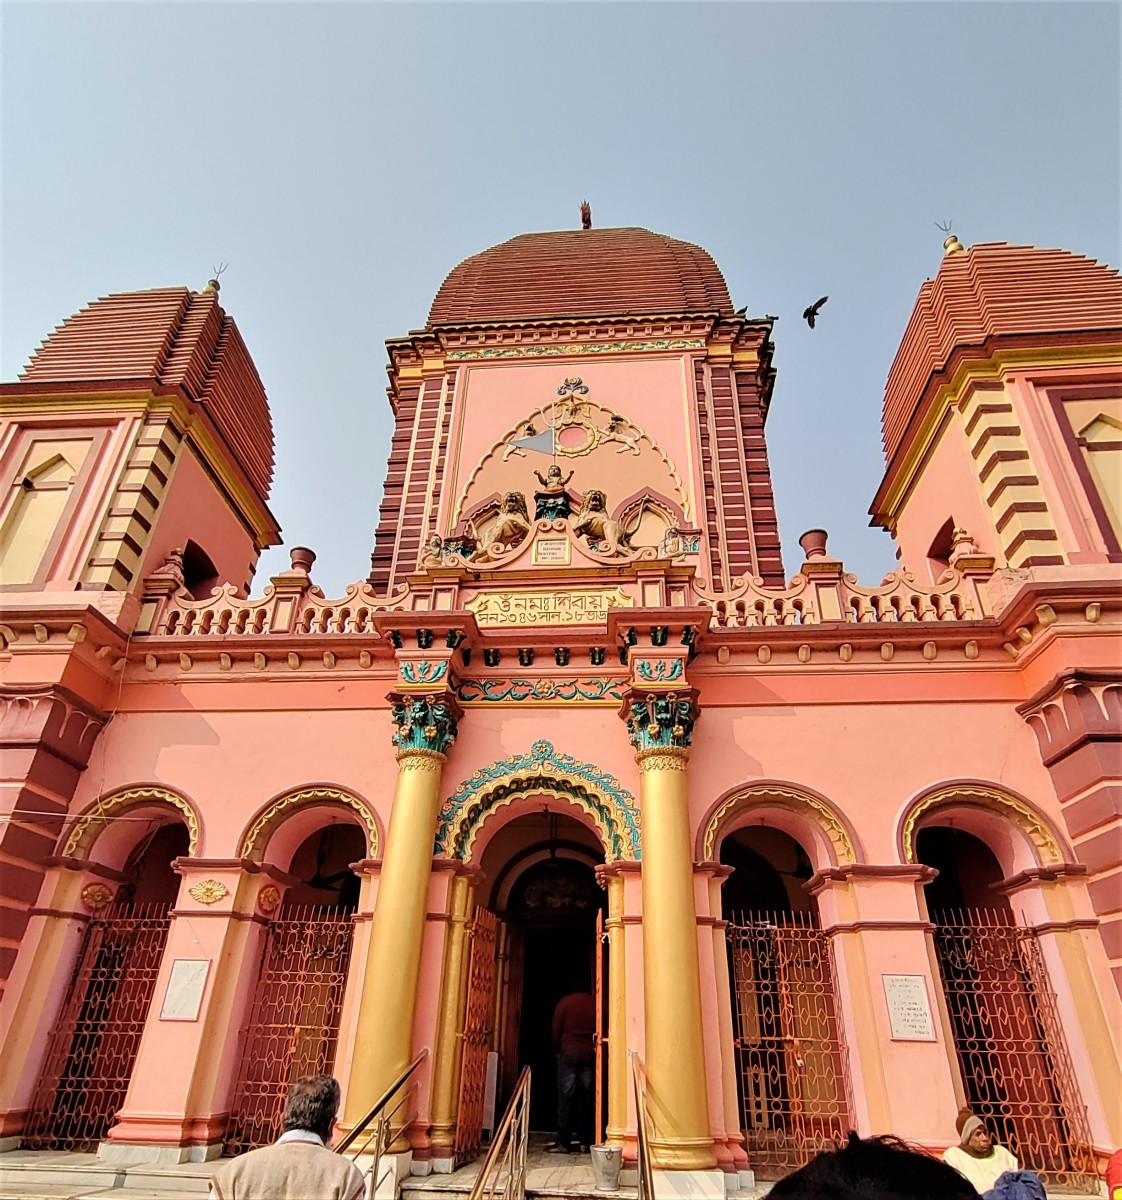 Kaleshwar temple : 5-arched entrance with two Corinthian type columns 